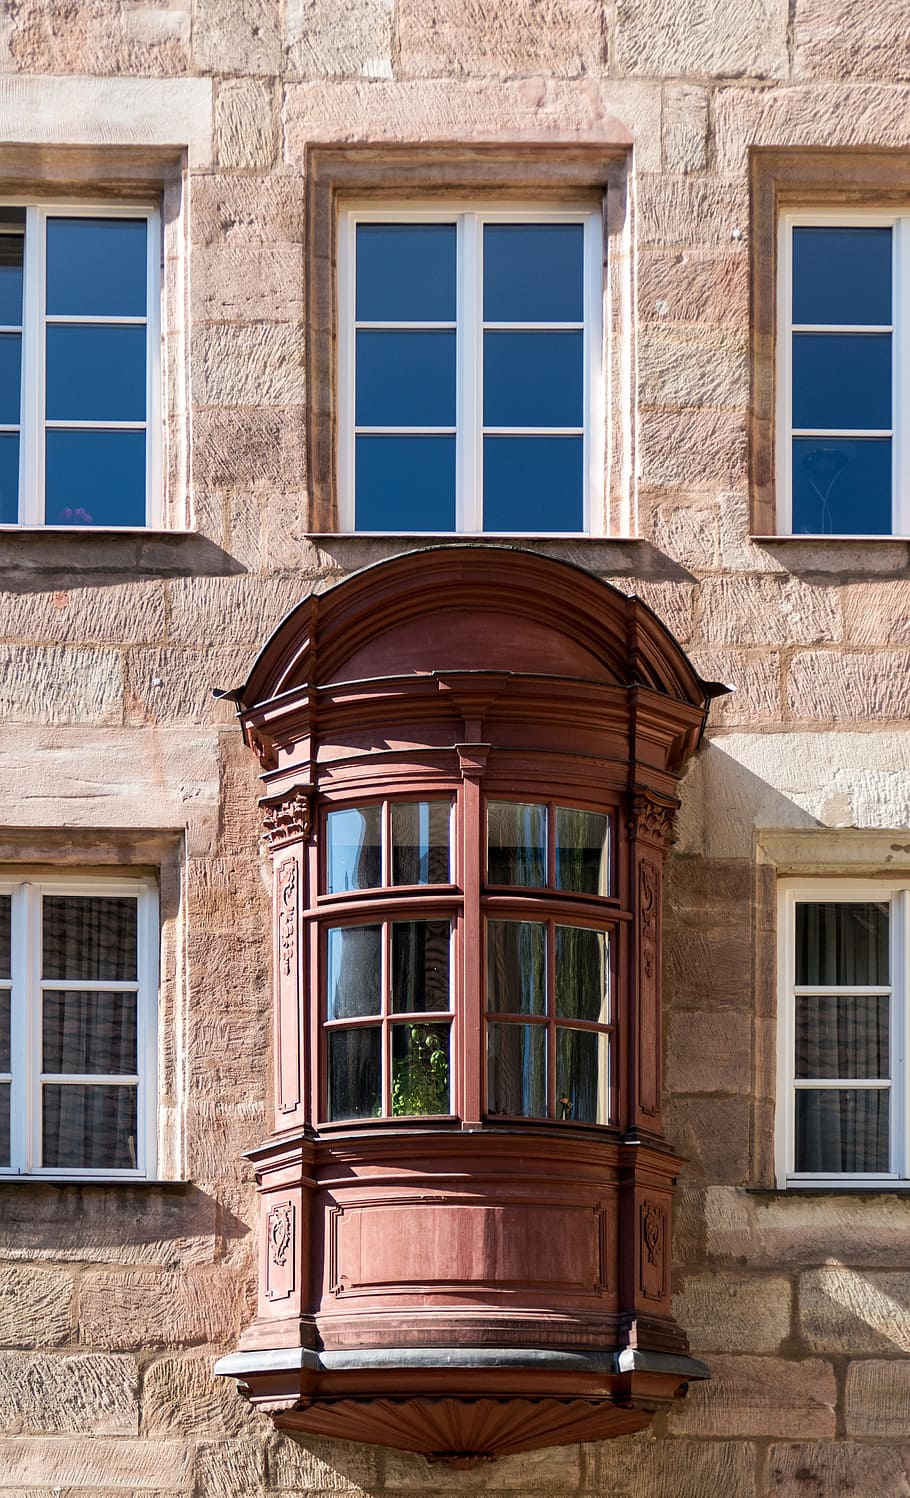 Architecture, Bay Window, chörlein, old town, building, historically, facade, home, old, part of the house